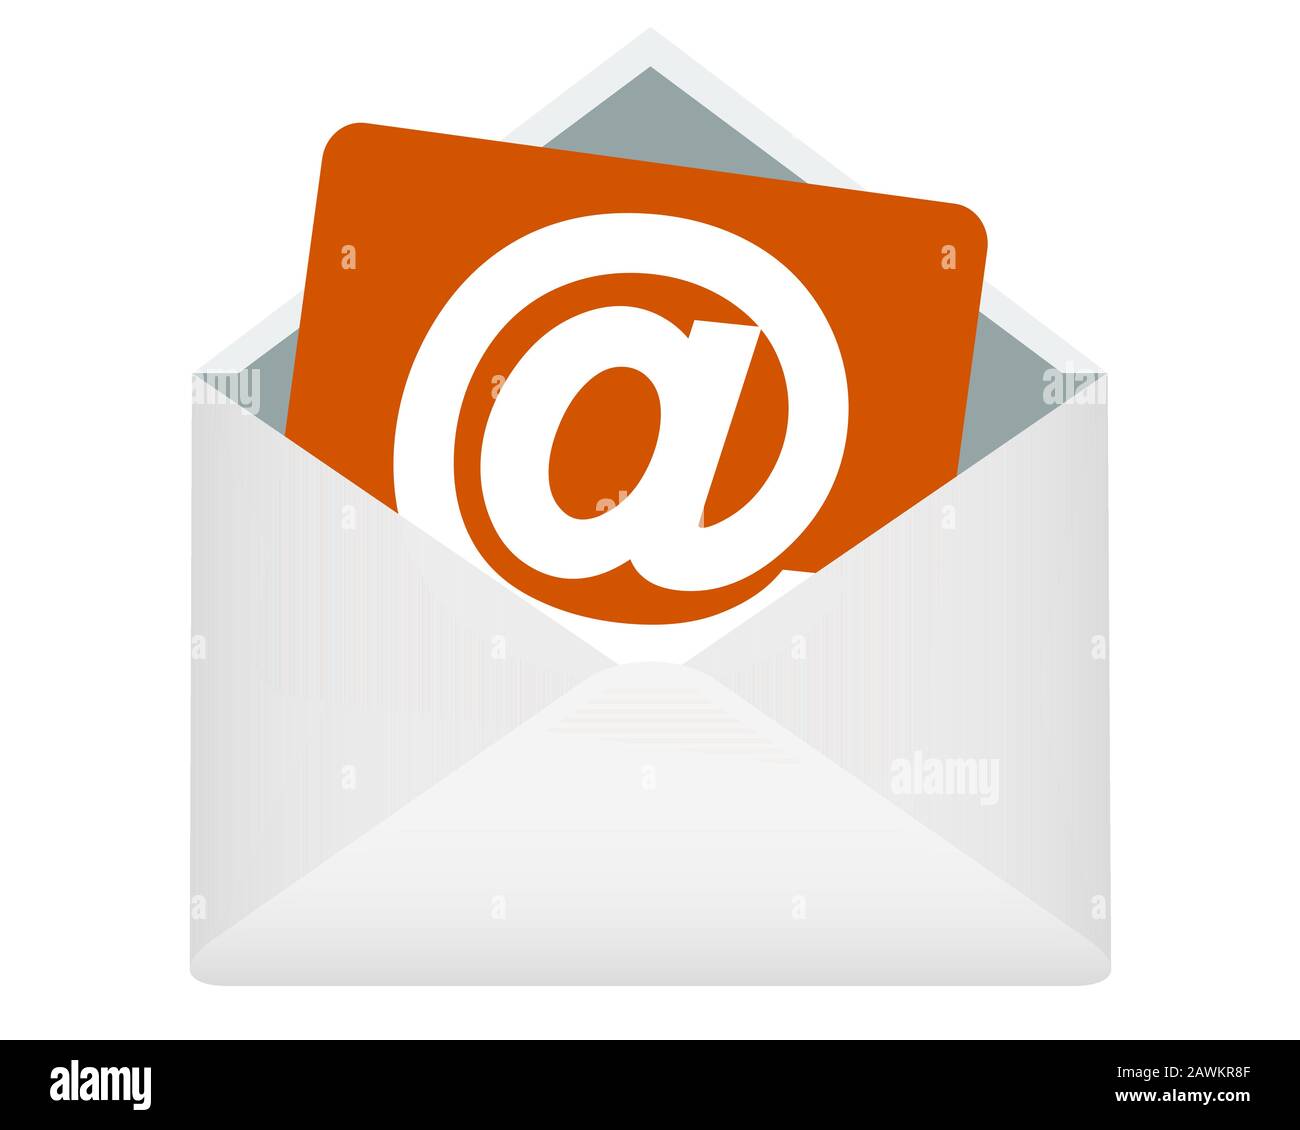 Envelope paper with icon email symbol. Vector illustration for design. Stock Vector